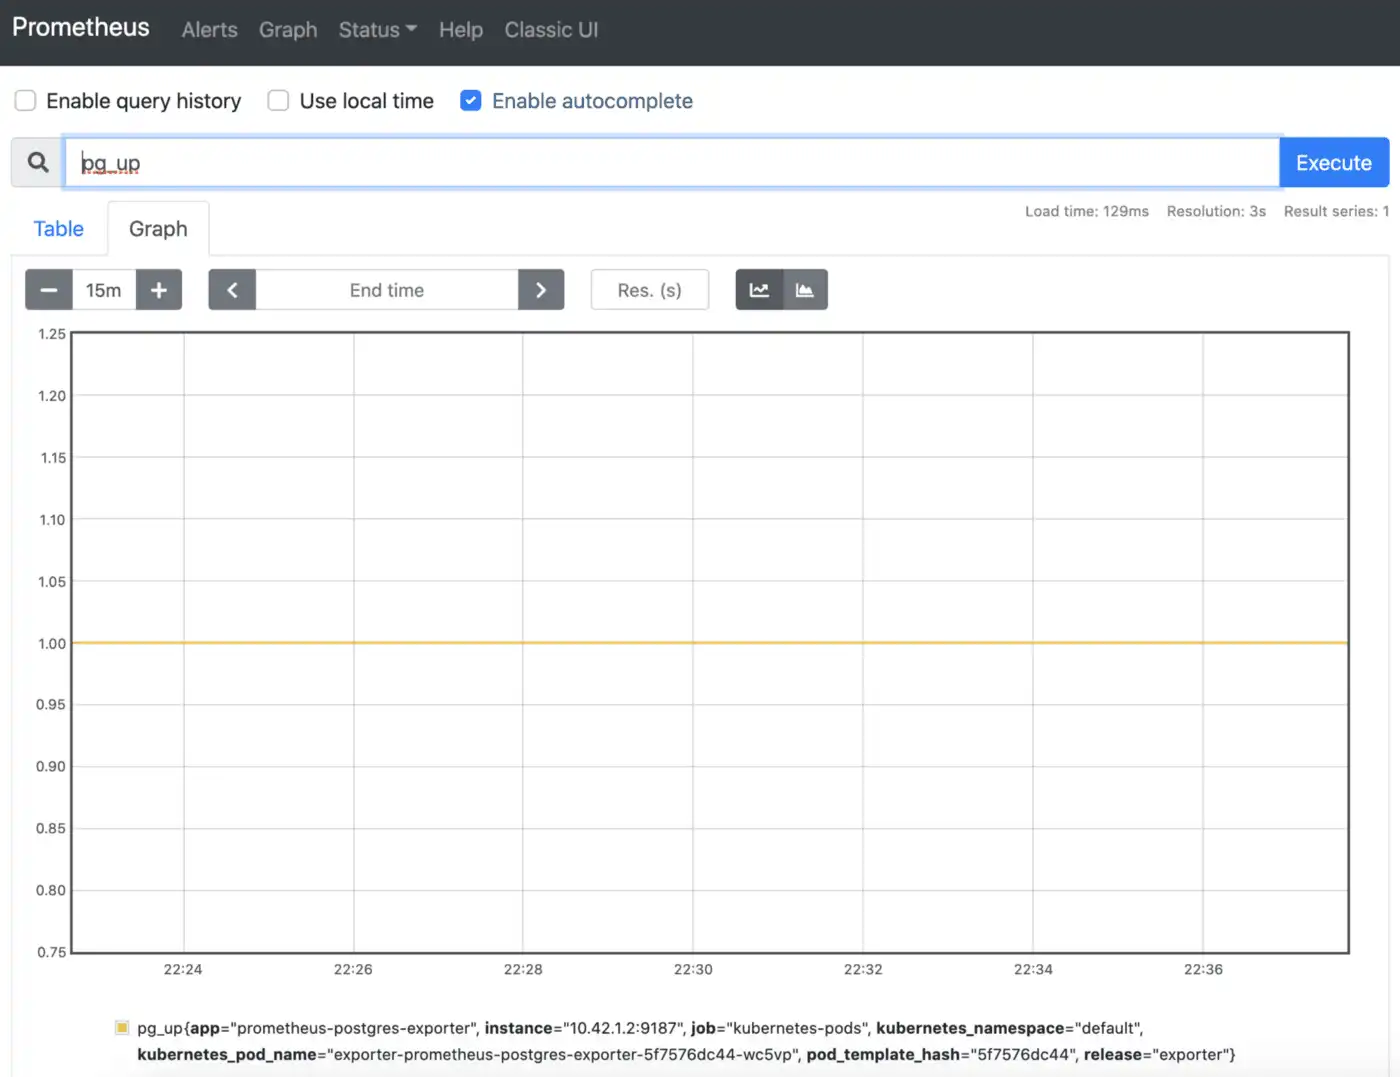 A screenshot of Prometheus monitoring the uptime of a QuestDB instance